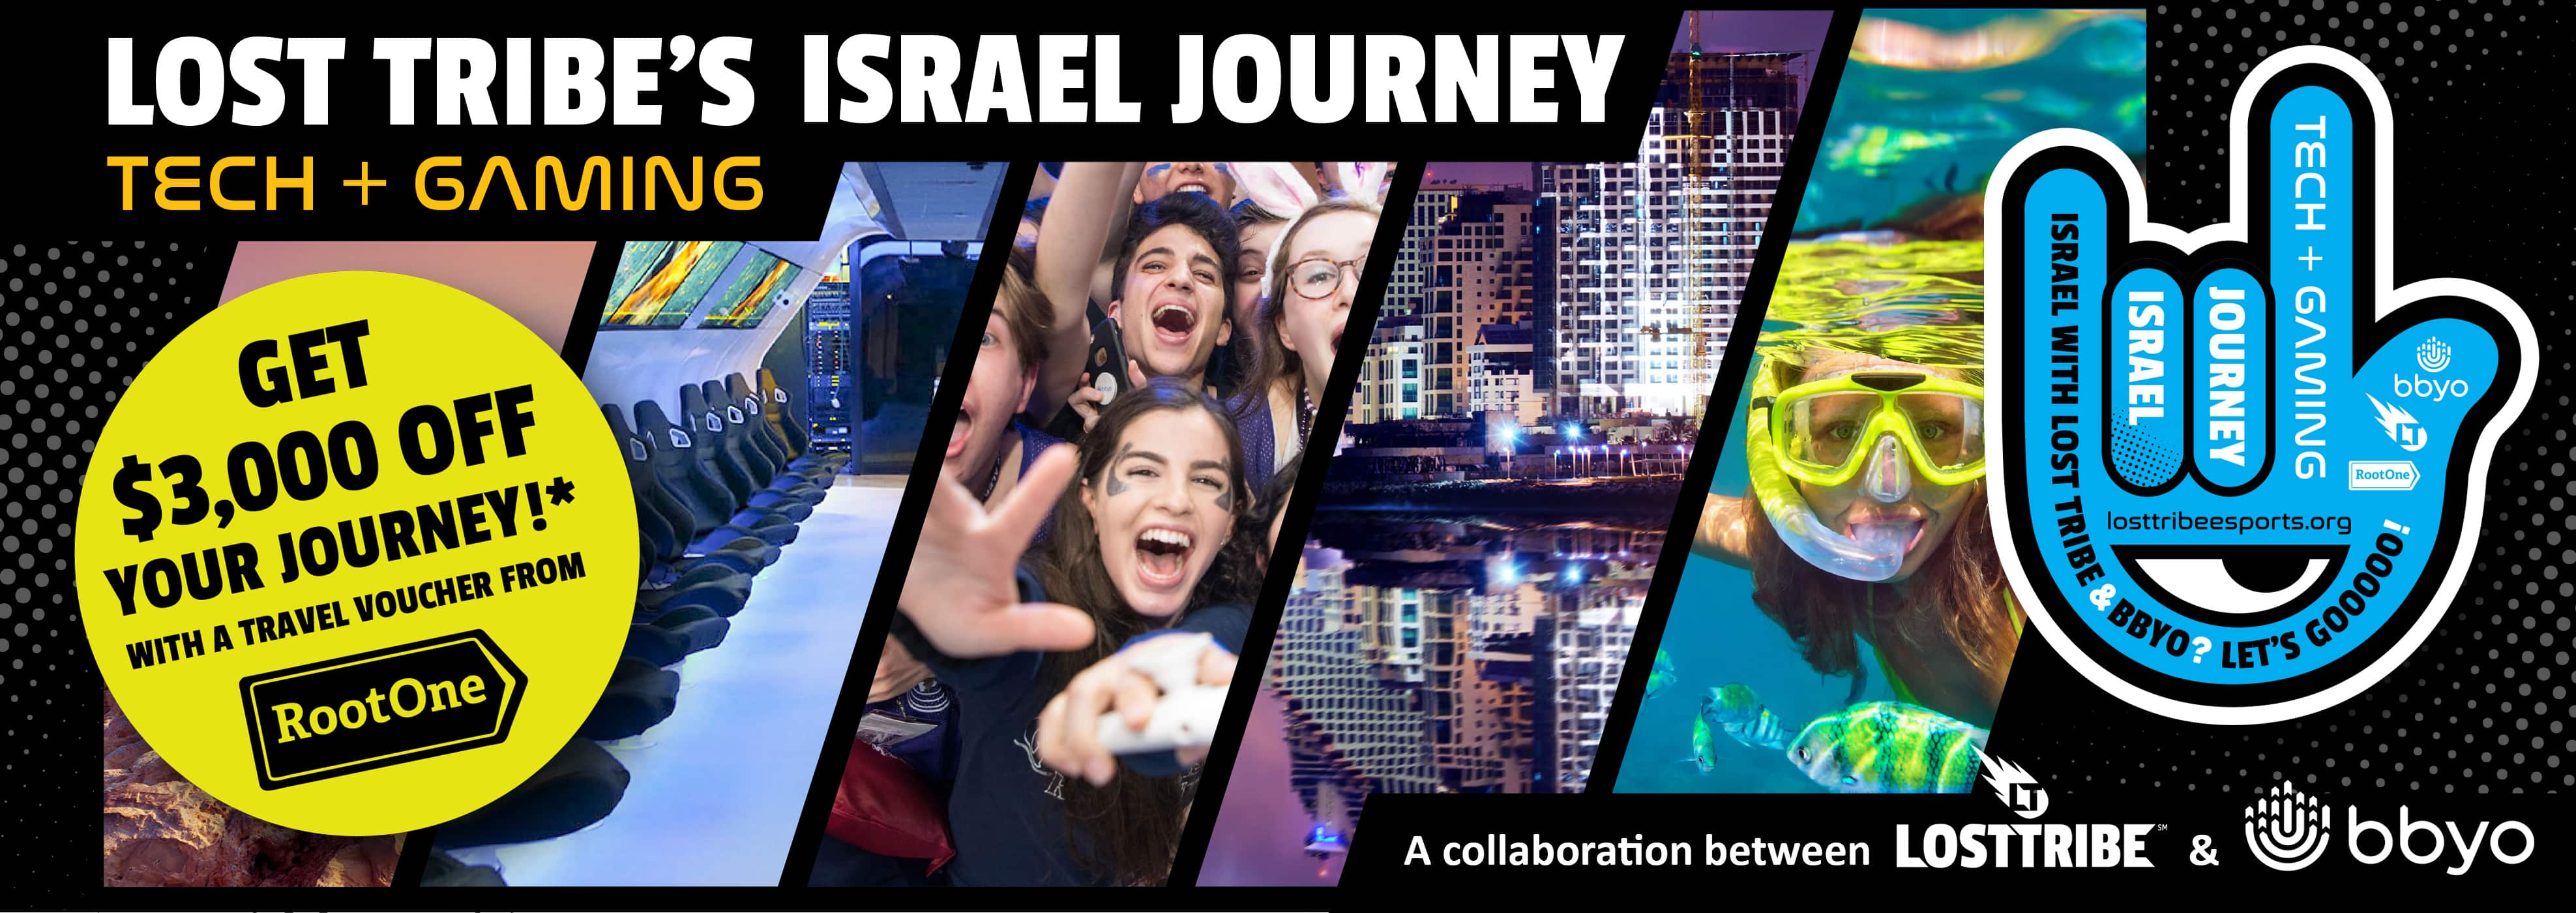 Lost Tribe’s Israel Journey: Tech & Gaming